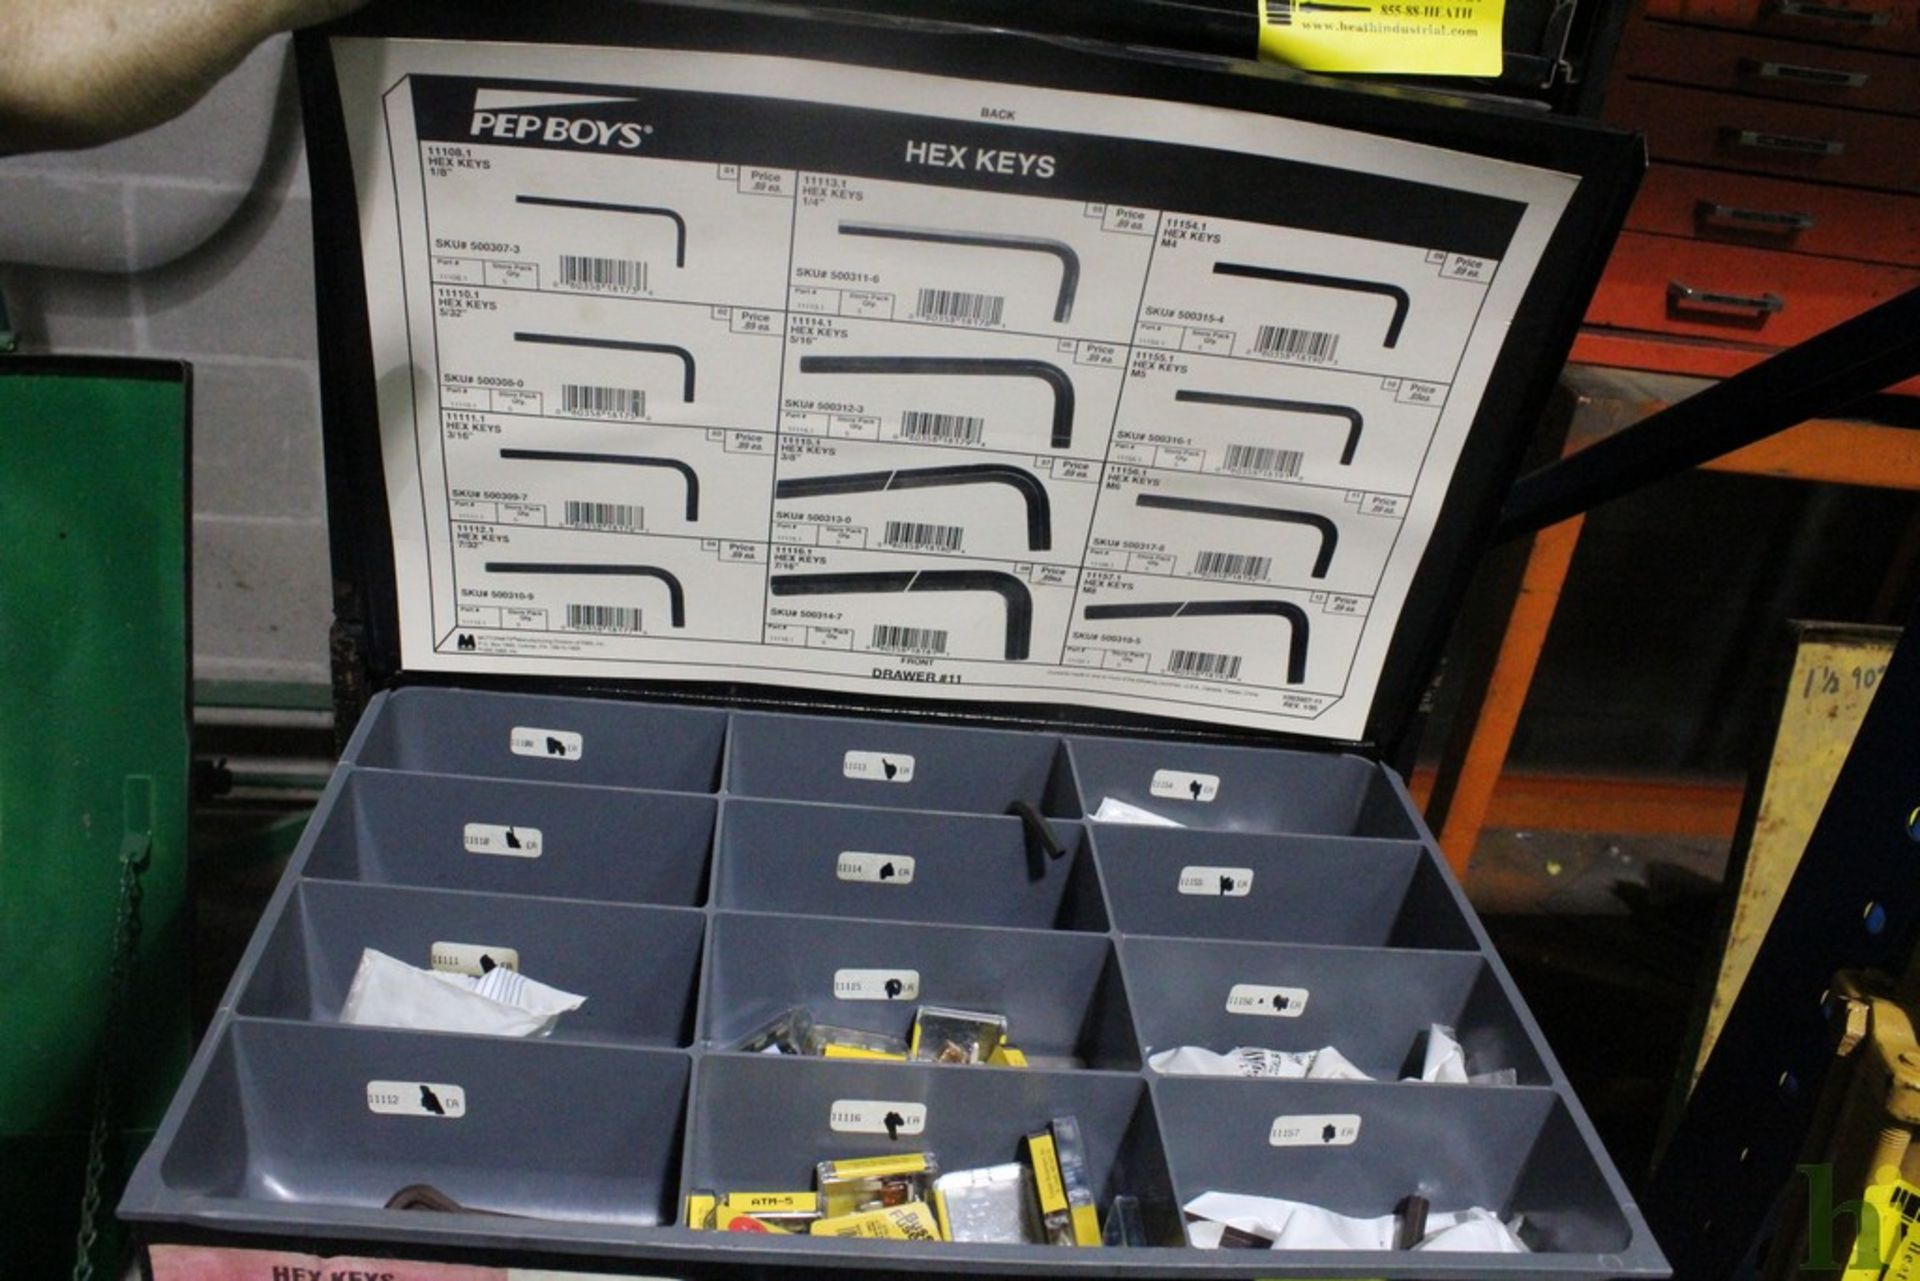 PEP BOYS HARDWARE DRAWER CABINET, 15" X 20" X 16", CONTAINS HEX KEYS, SPRINGS, PINS AND E-CLIPS - Image 5 of 5